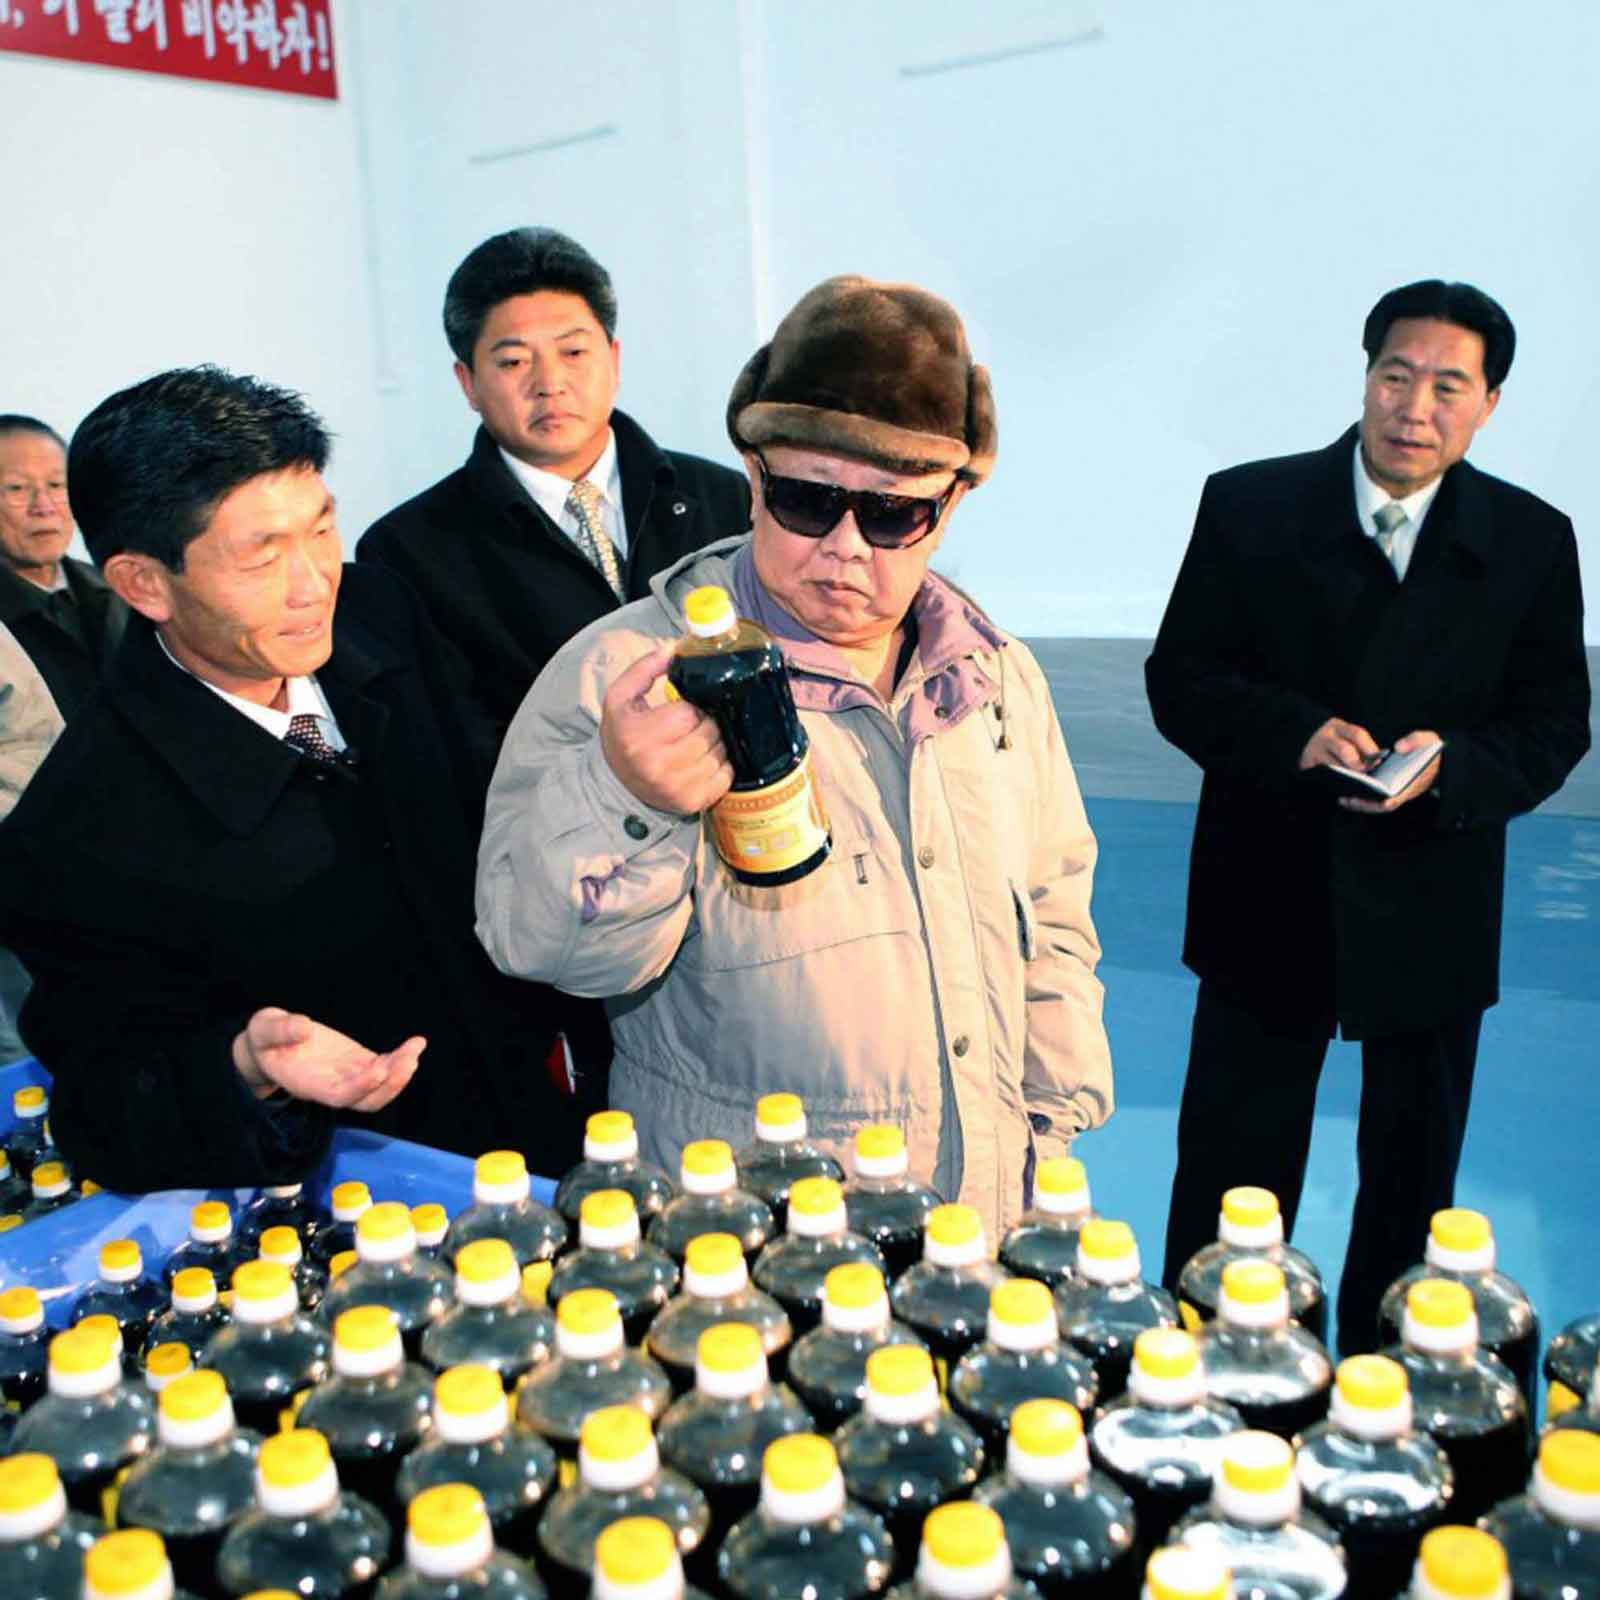 The Tumblr Blog "Kim Jong-Il Looking at Things" Is Simple Yet Fascinating